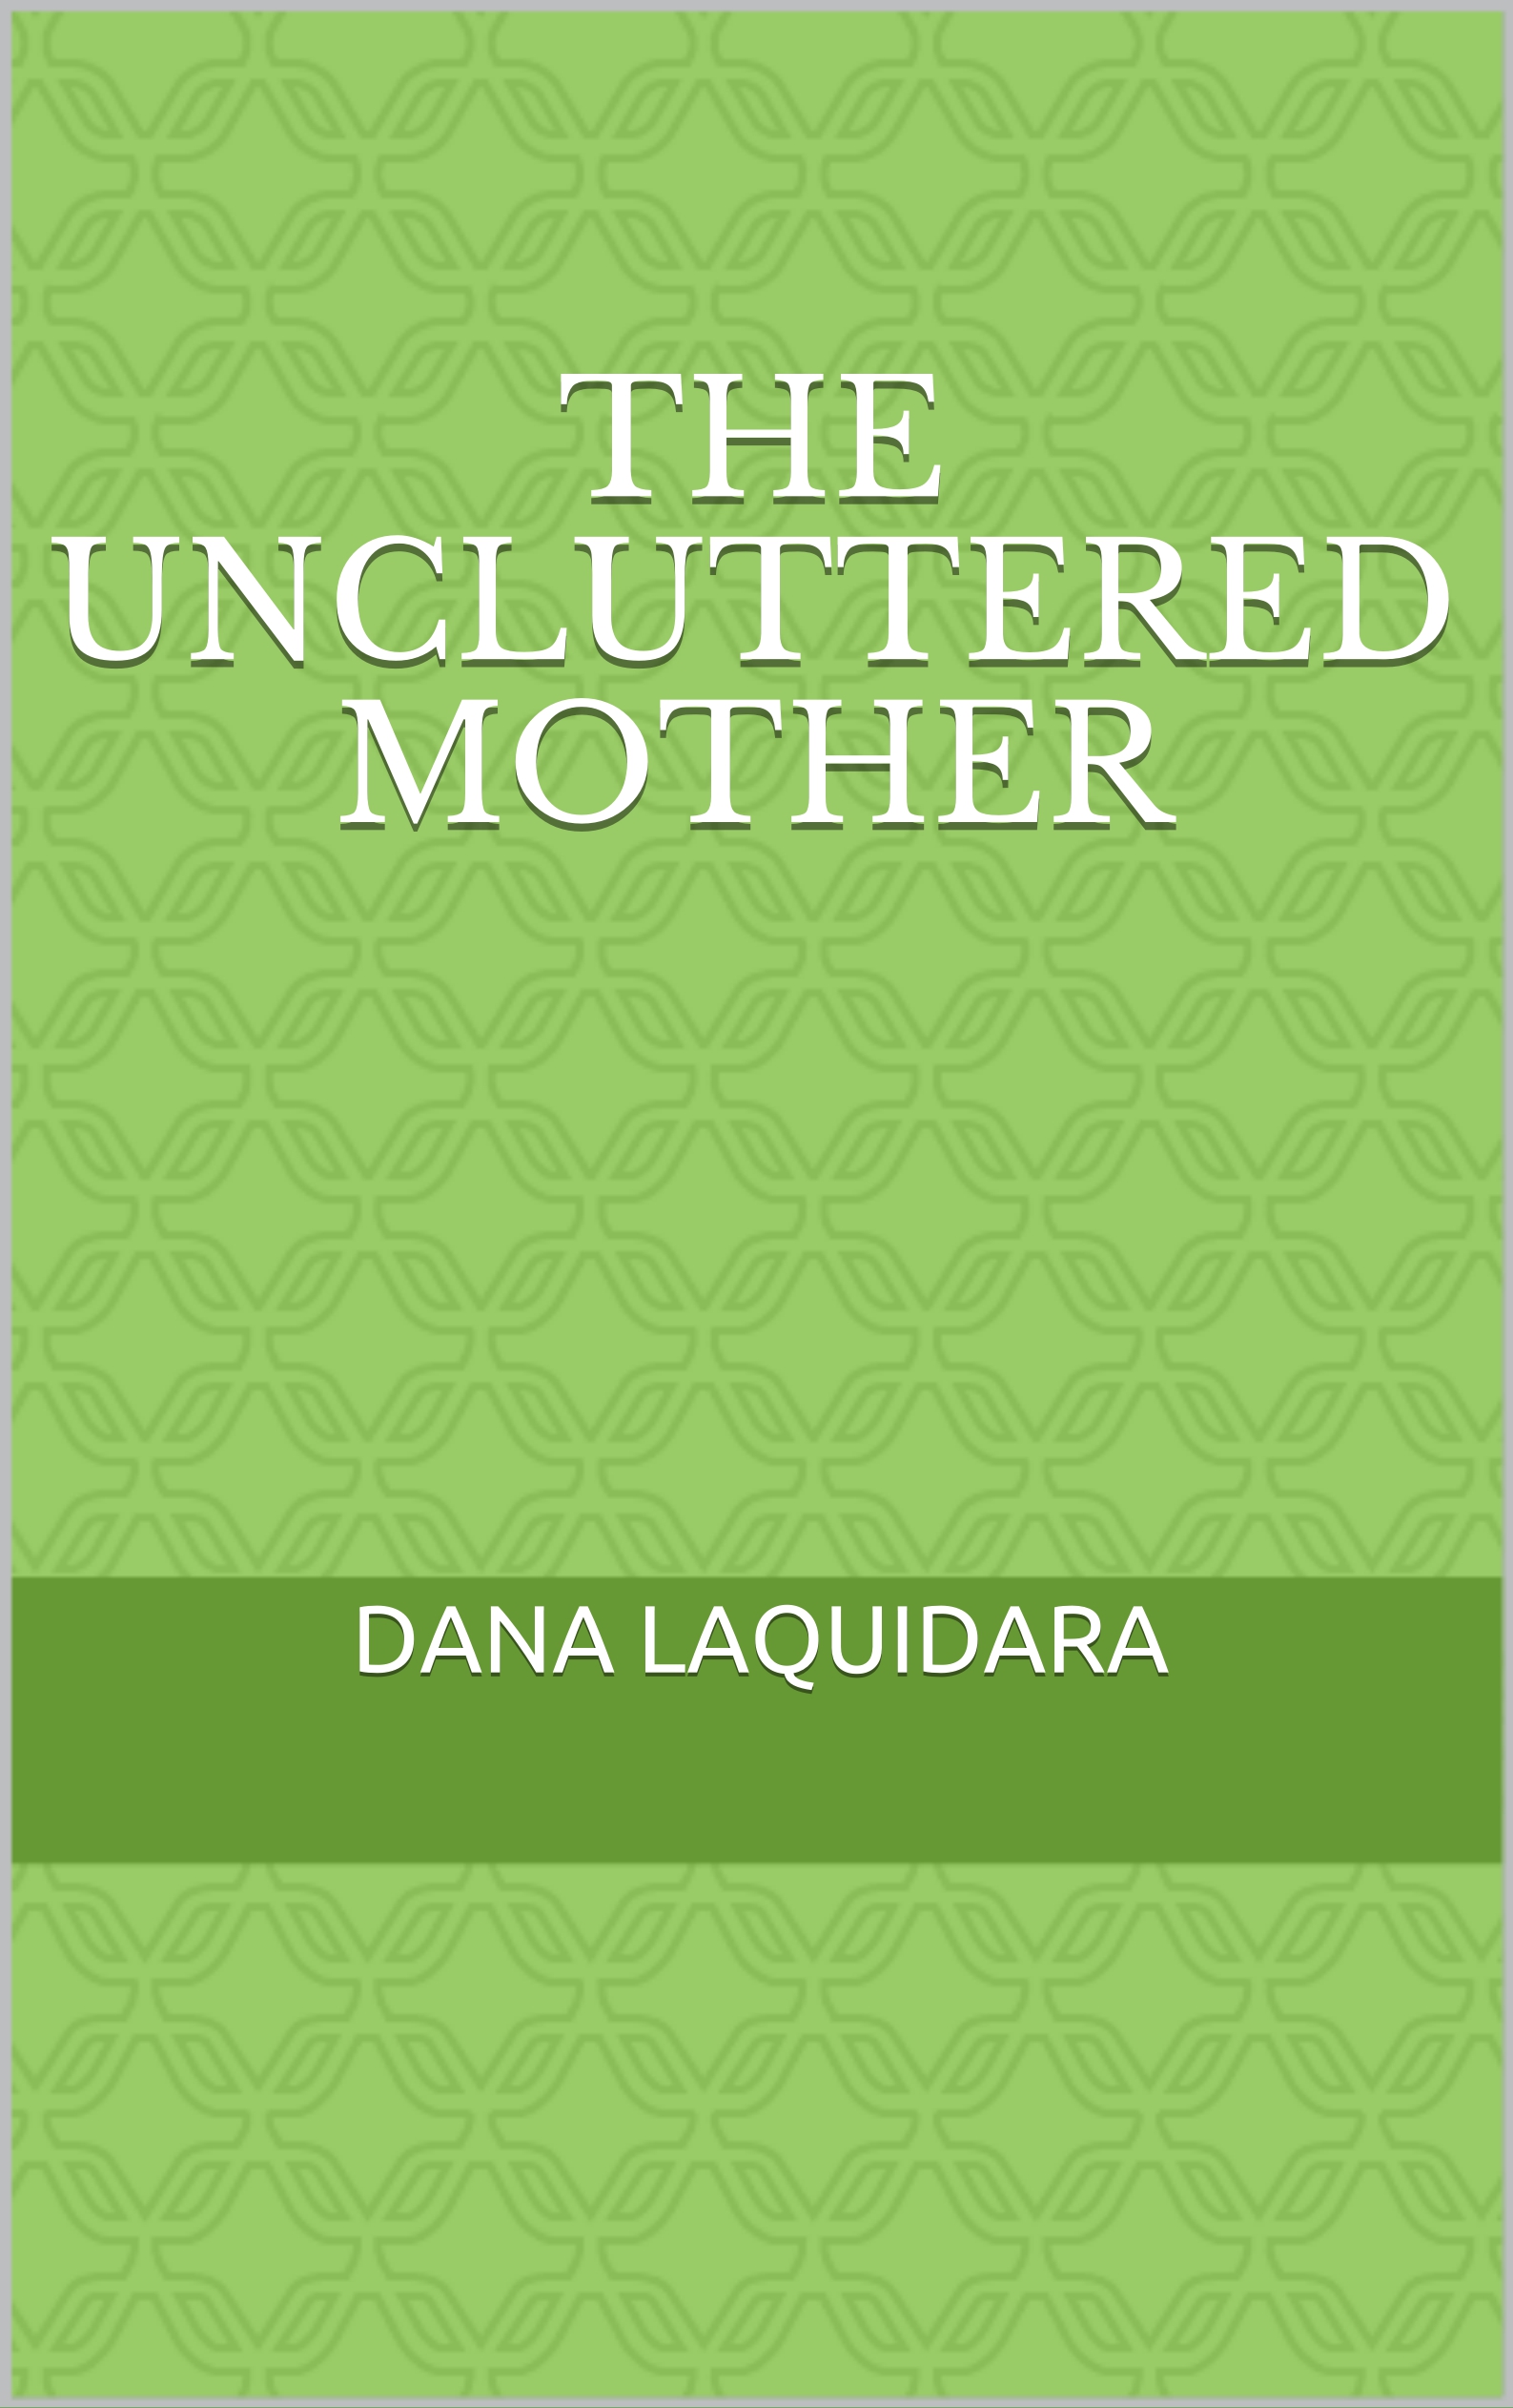 FREE: The Uncluttered Mother by dana laquidara